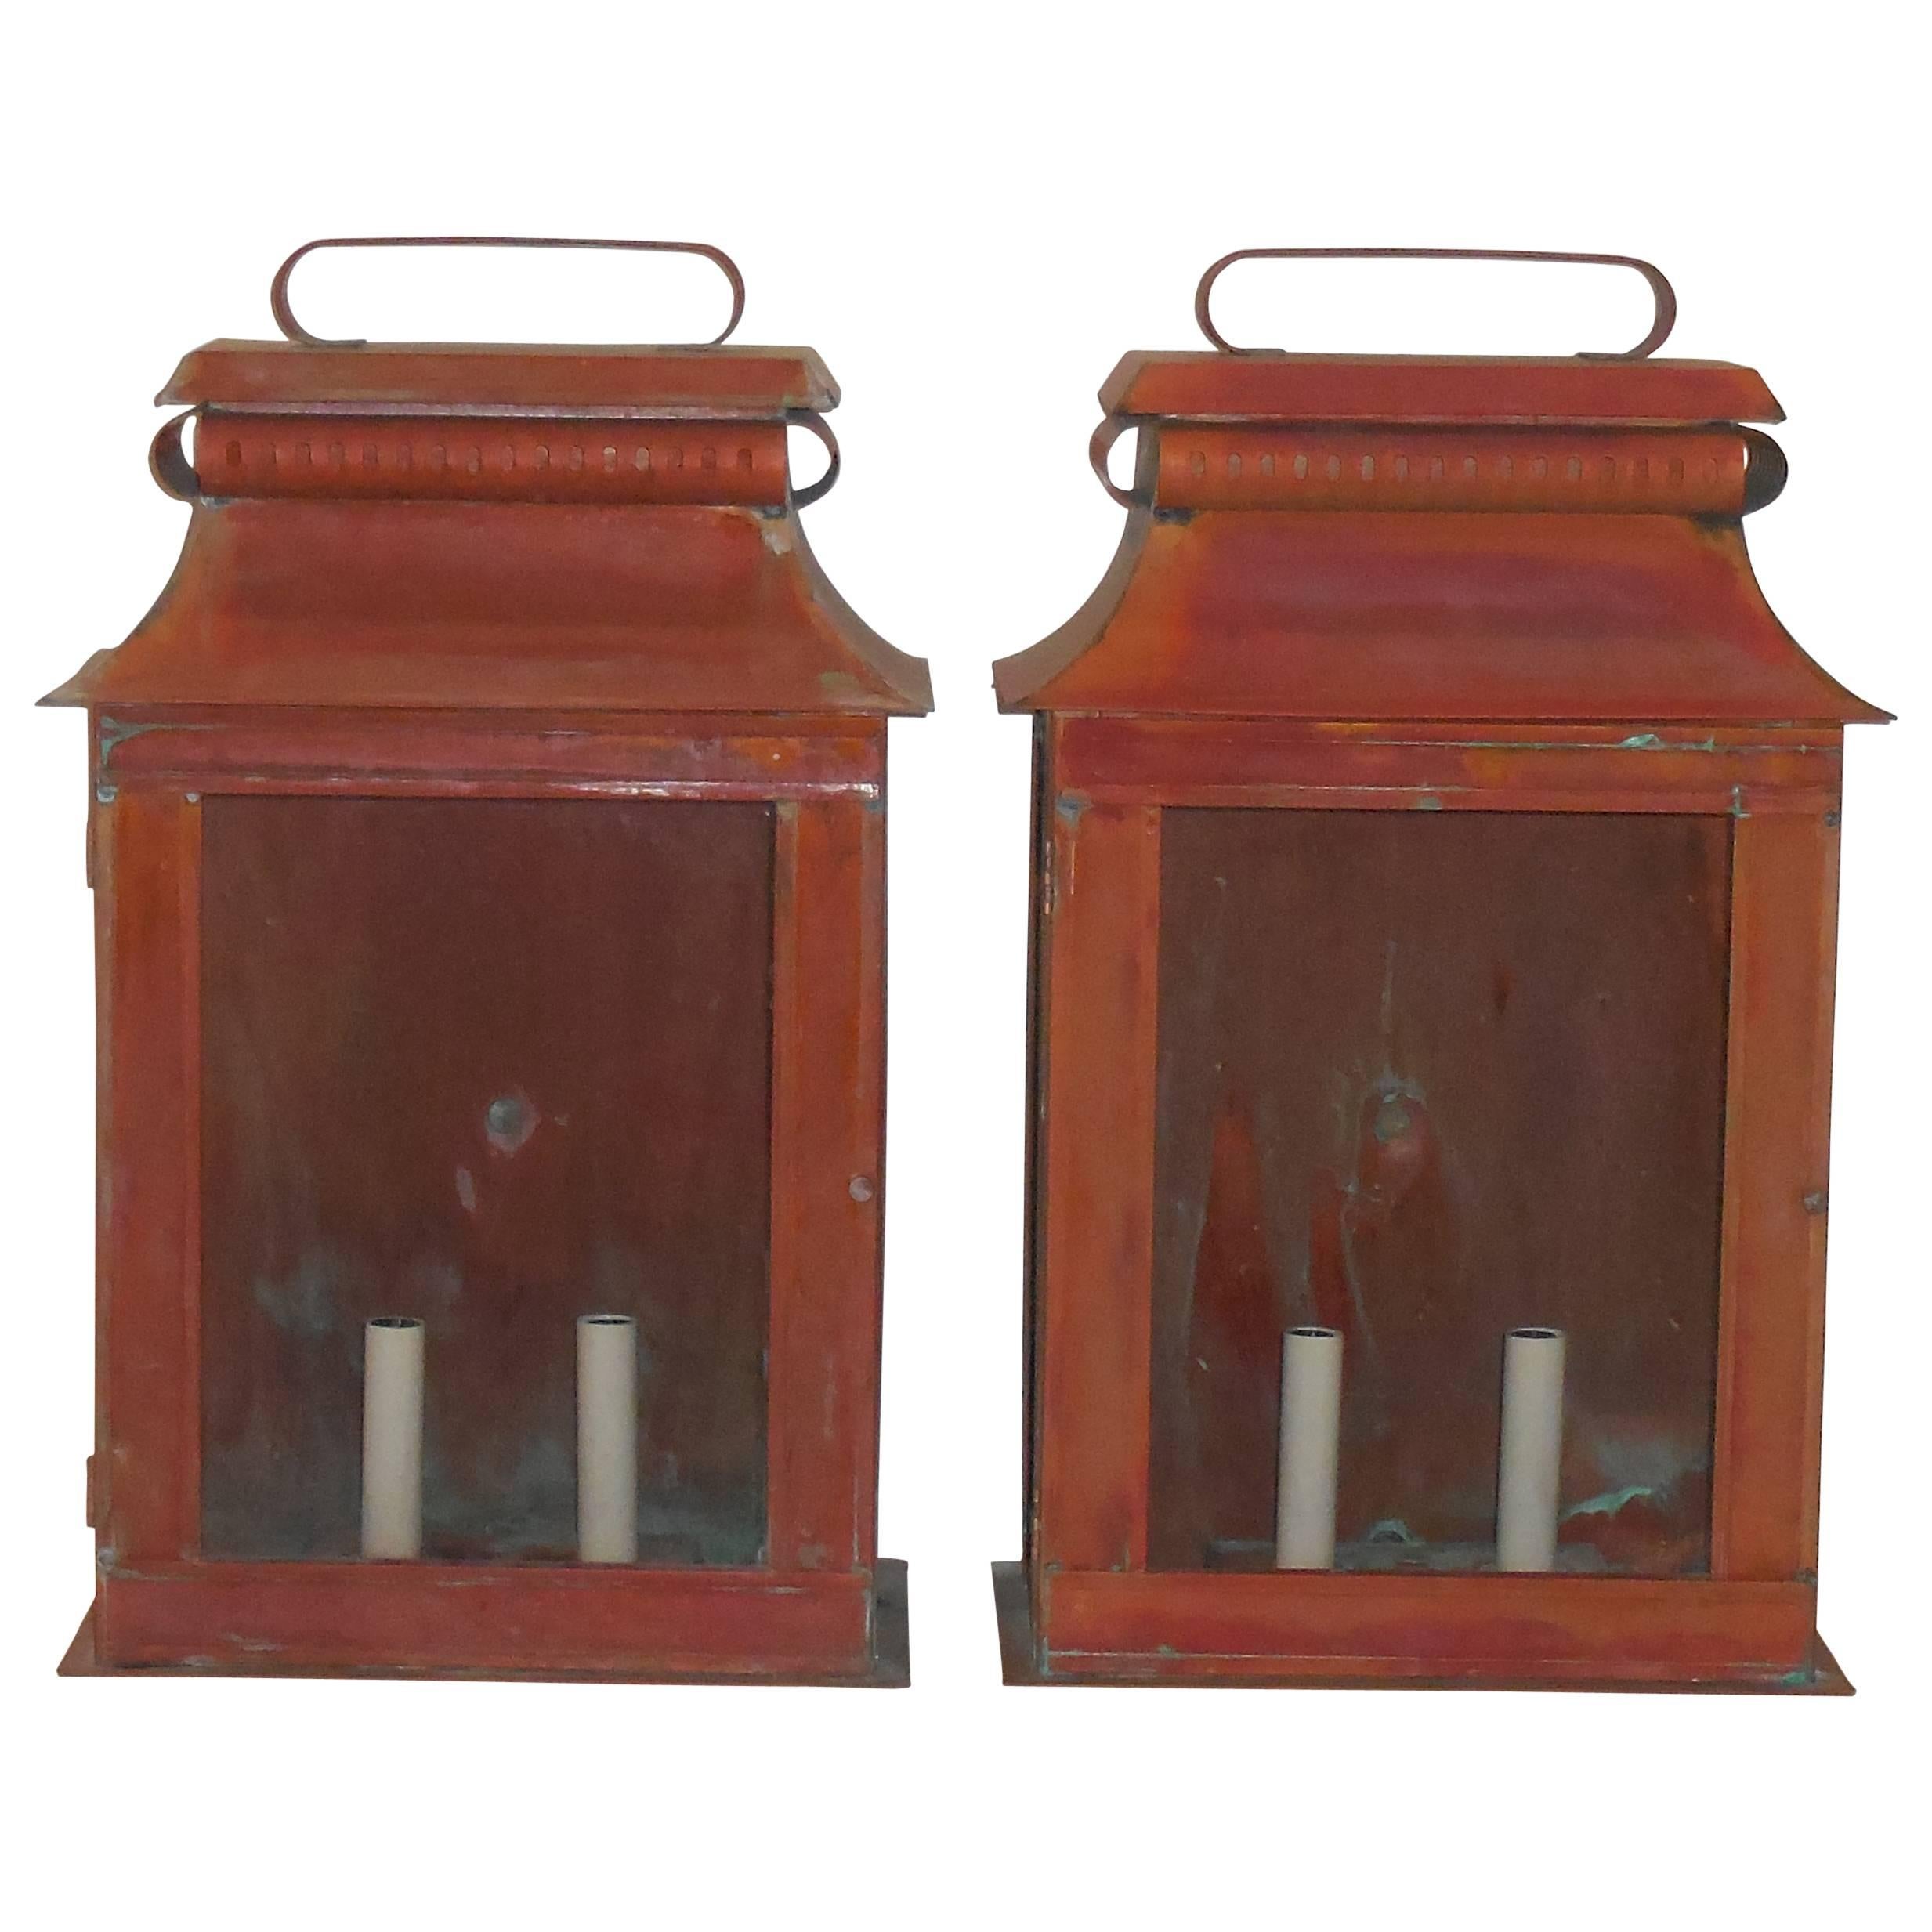 Pair of Large Architectural Wall Copper Lantern